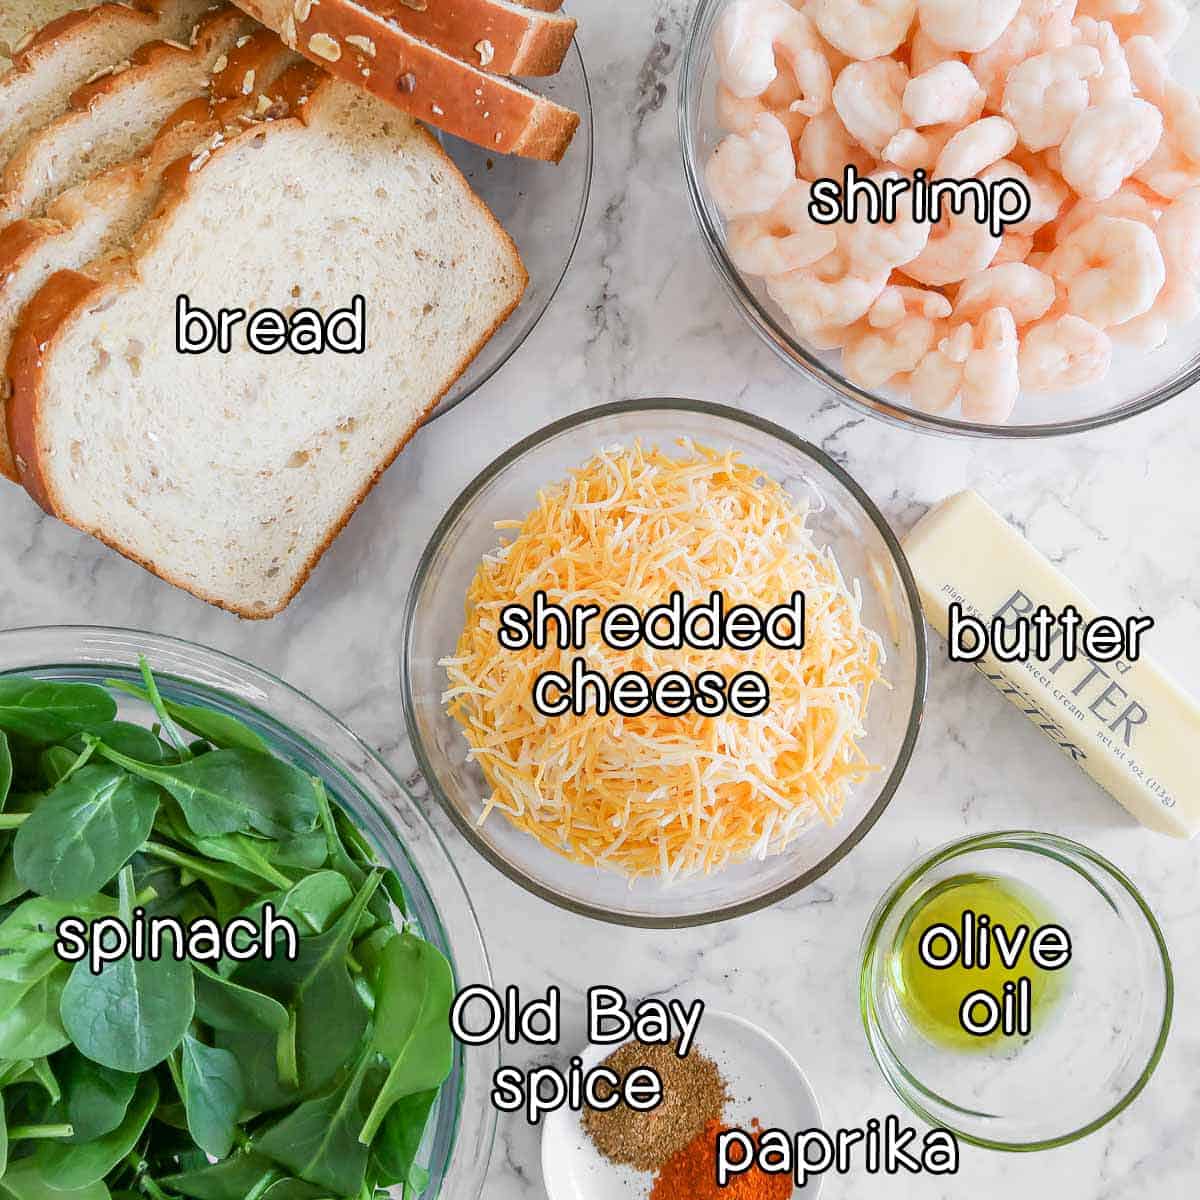 Overhead shot of ingredients- bread, shrimp, shredded cheese, spinach, butter, olive oil, old bay spice, and paprika.